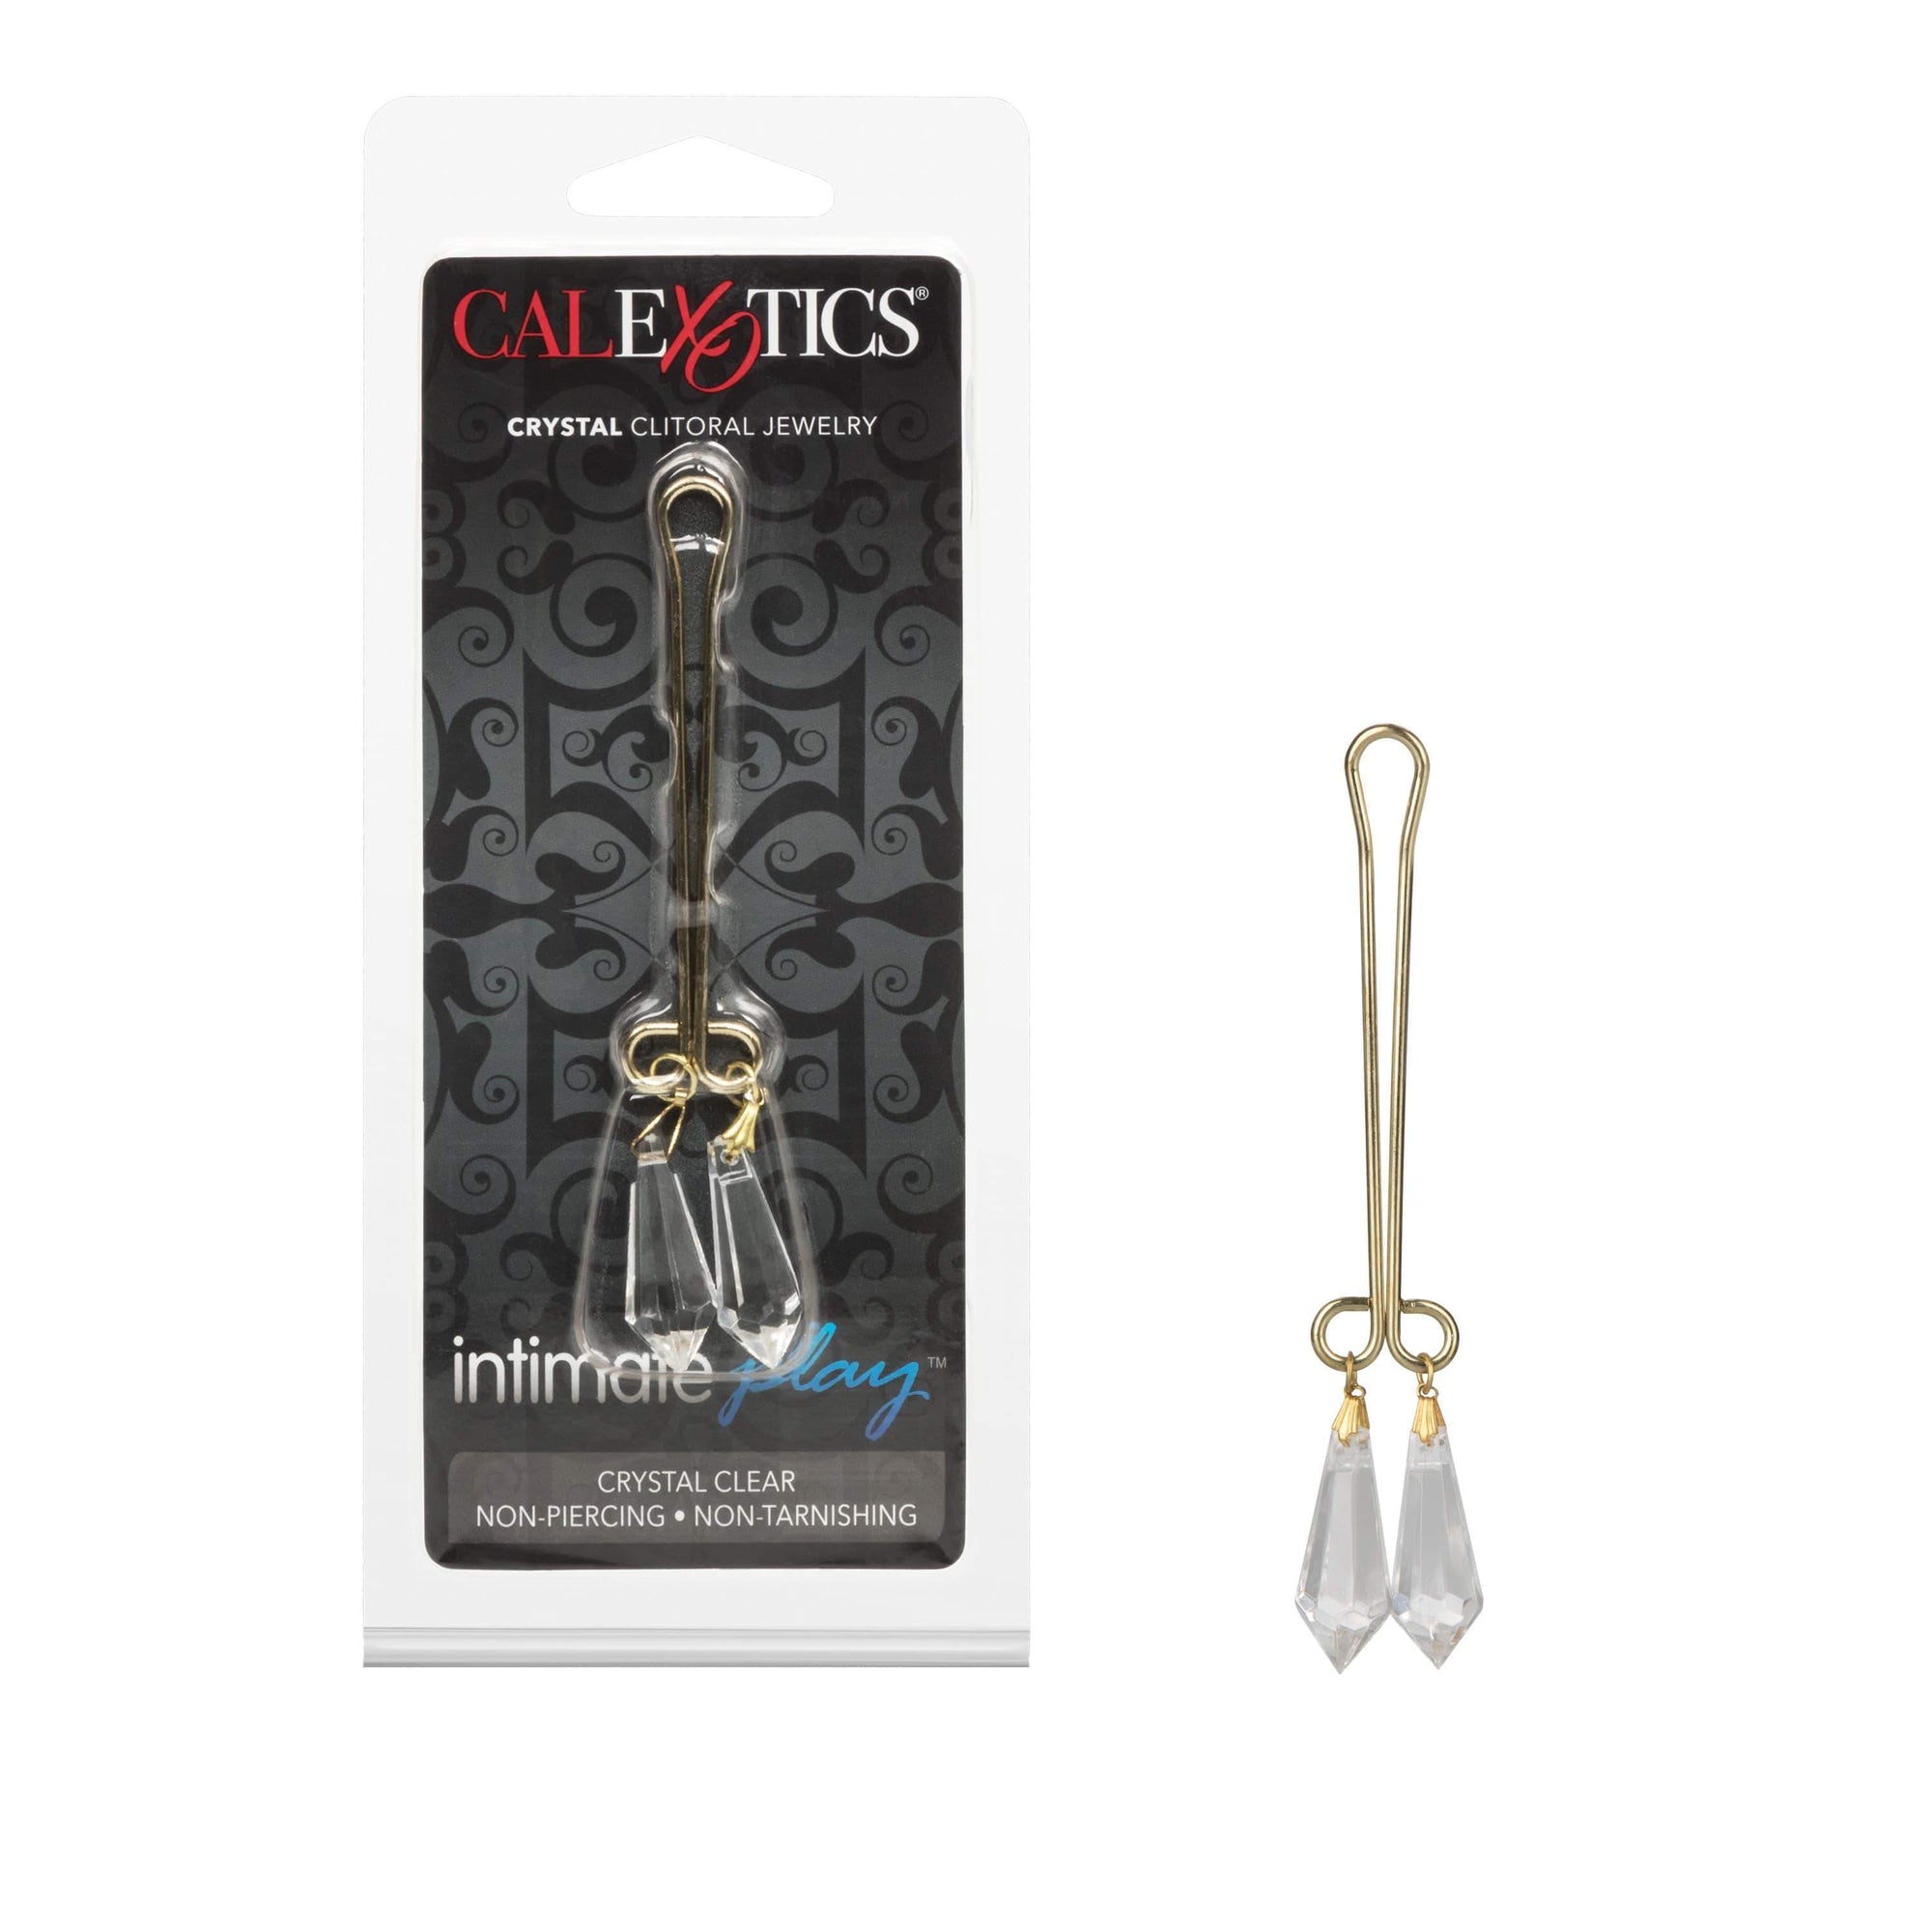 California Exotics - Intimate Play Crystal Clitoral Jewelry Clamp (Gold) Clitoral Clamps 716770009401 CherryAffairs